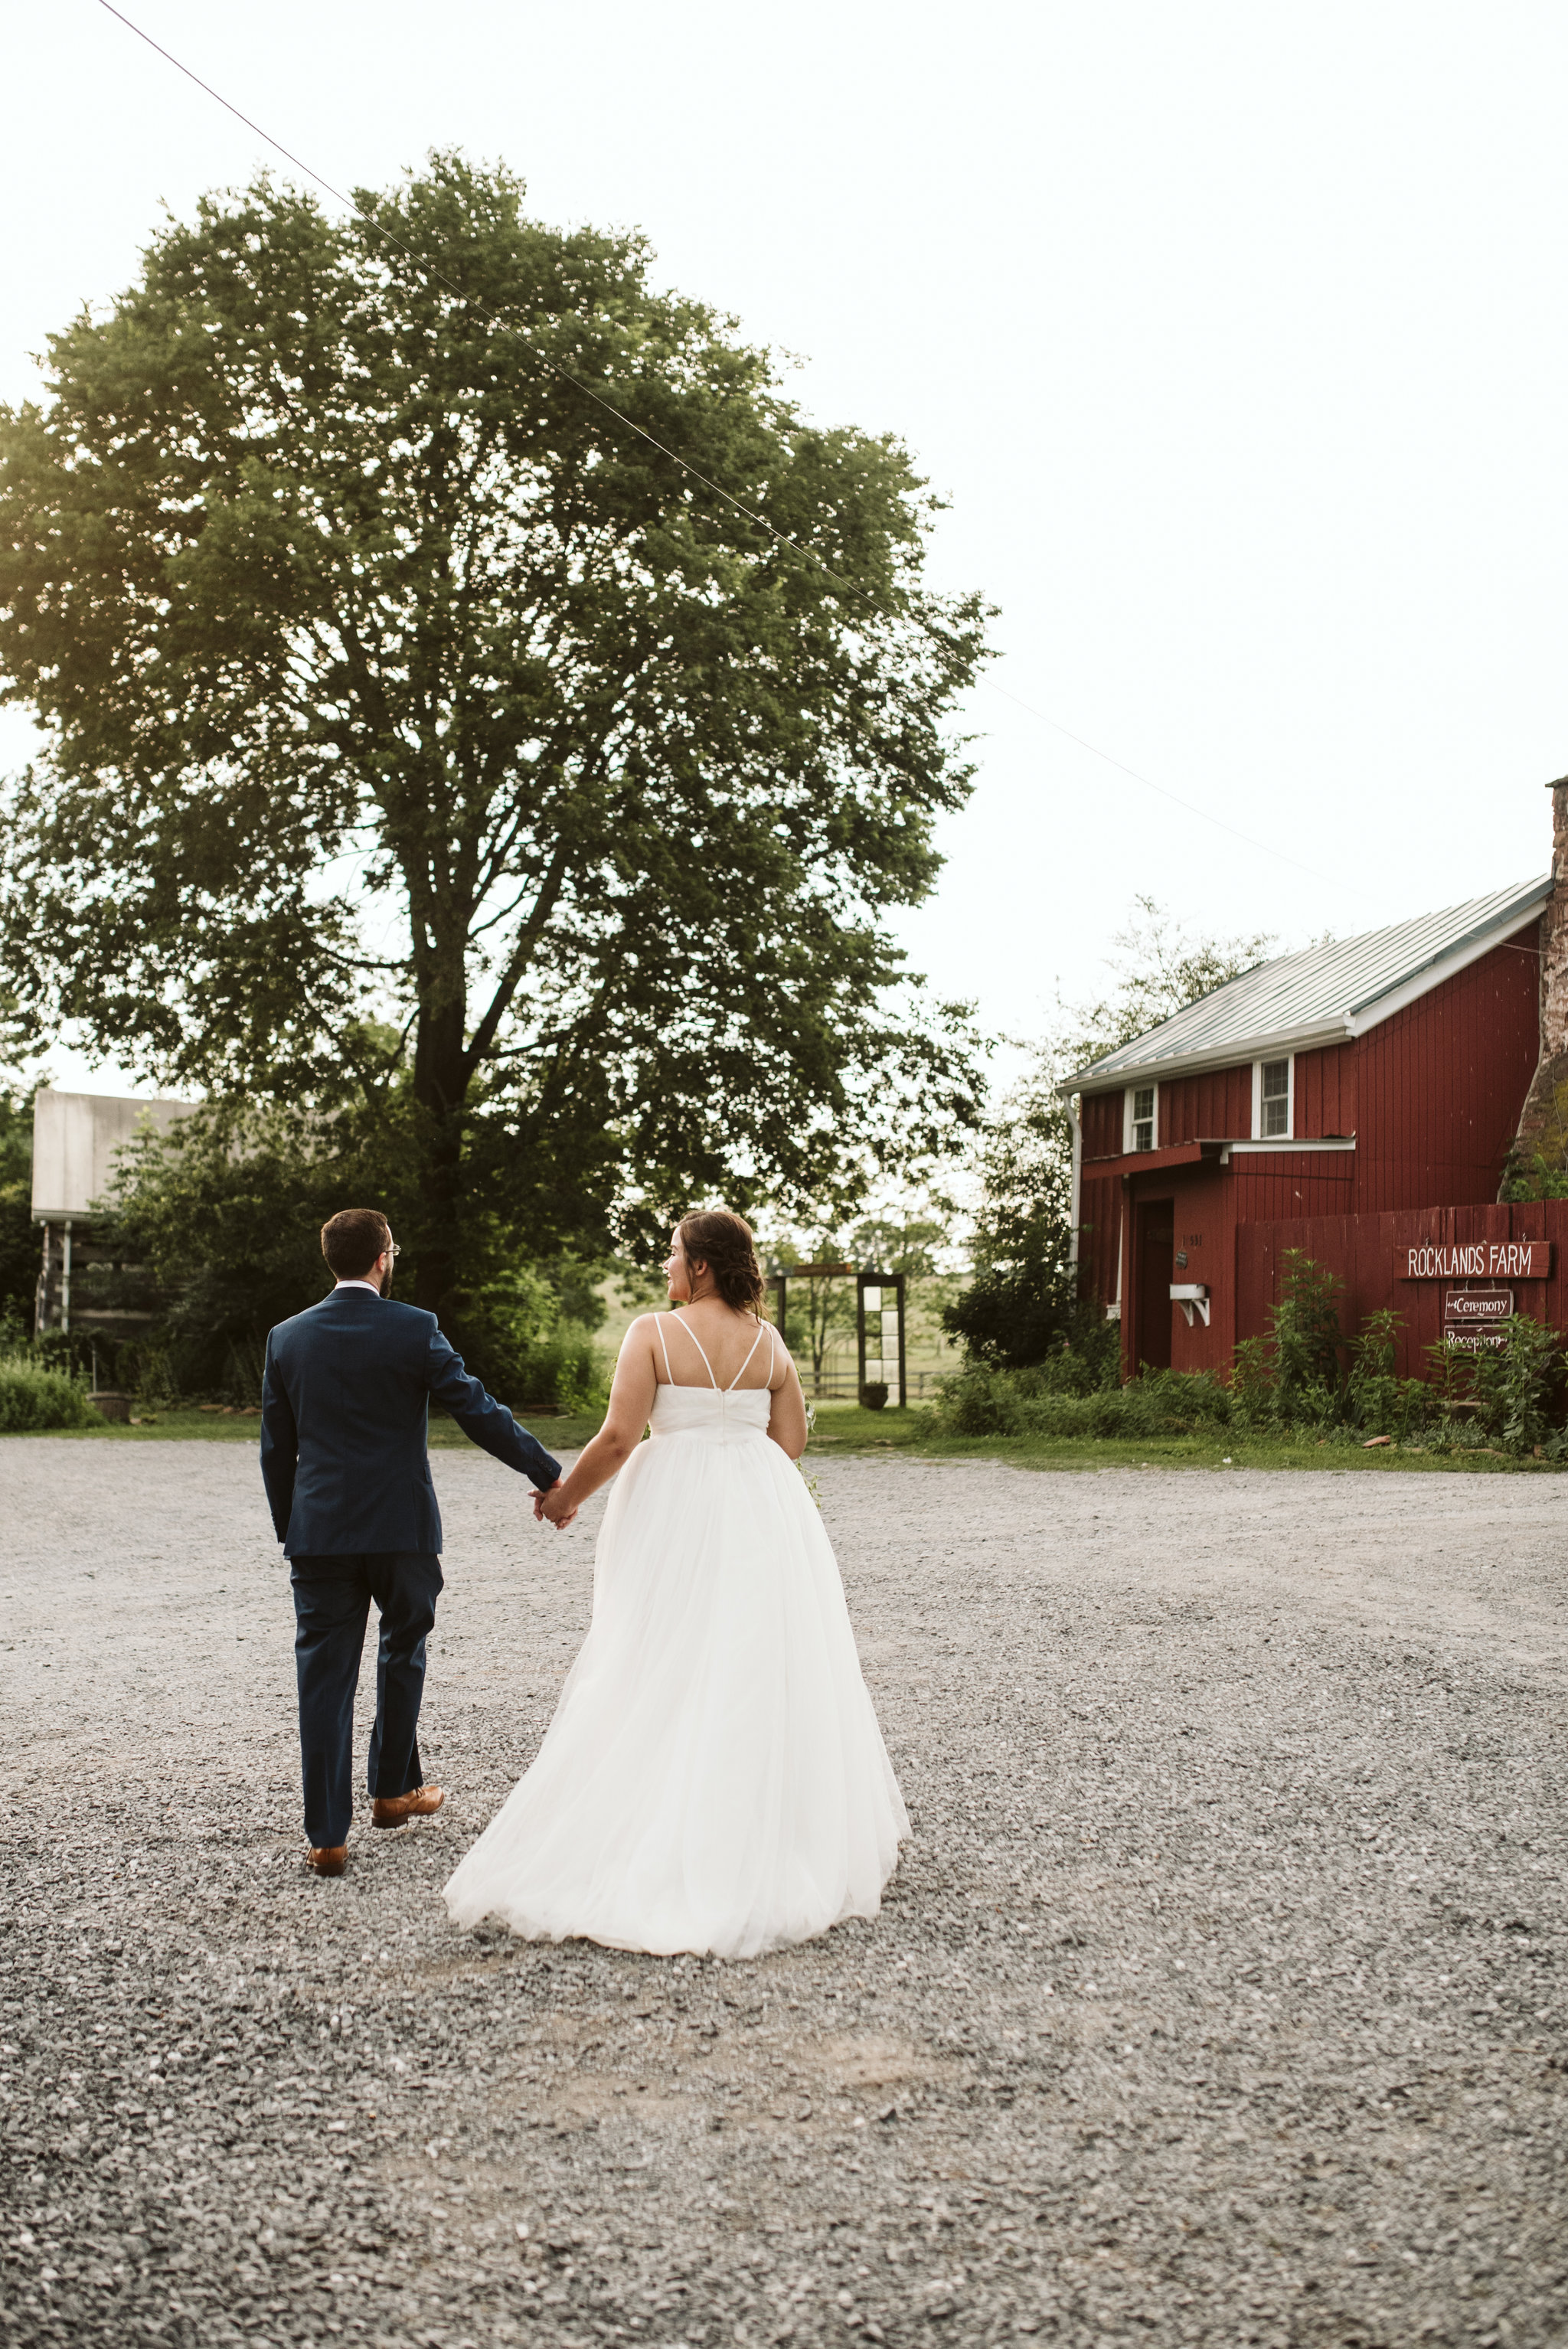 Rocklands Farm, Maryland, Intimate Wedding, Baltimore Wedding Photographer, Sungold Flower Co, Rustic, Romantic, Barn Wedding, Bride and Groom Holding Hands Walking Outside, Just Married